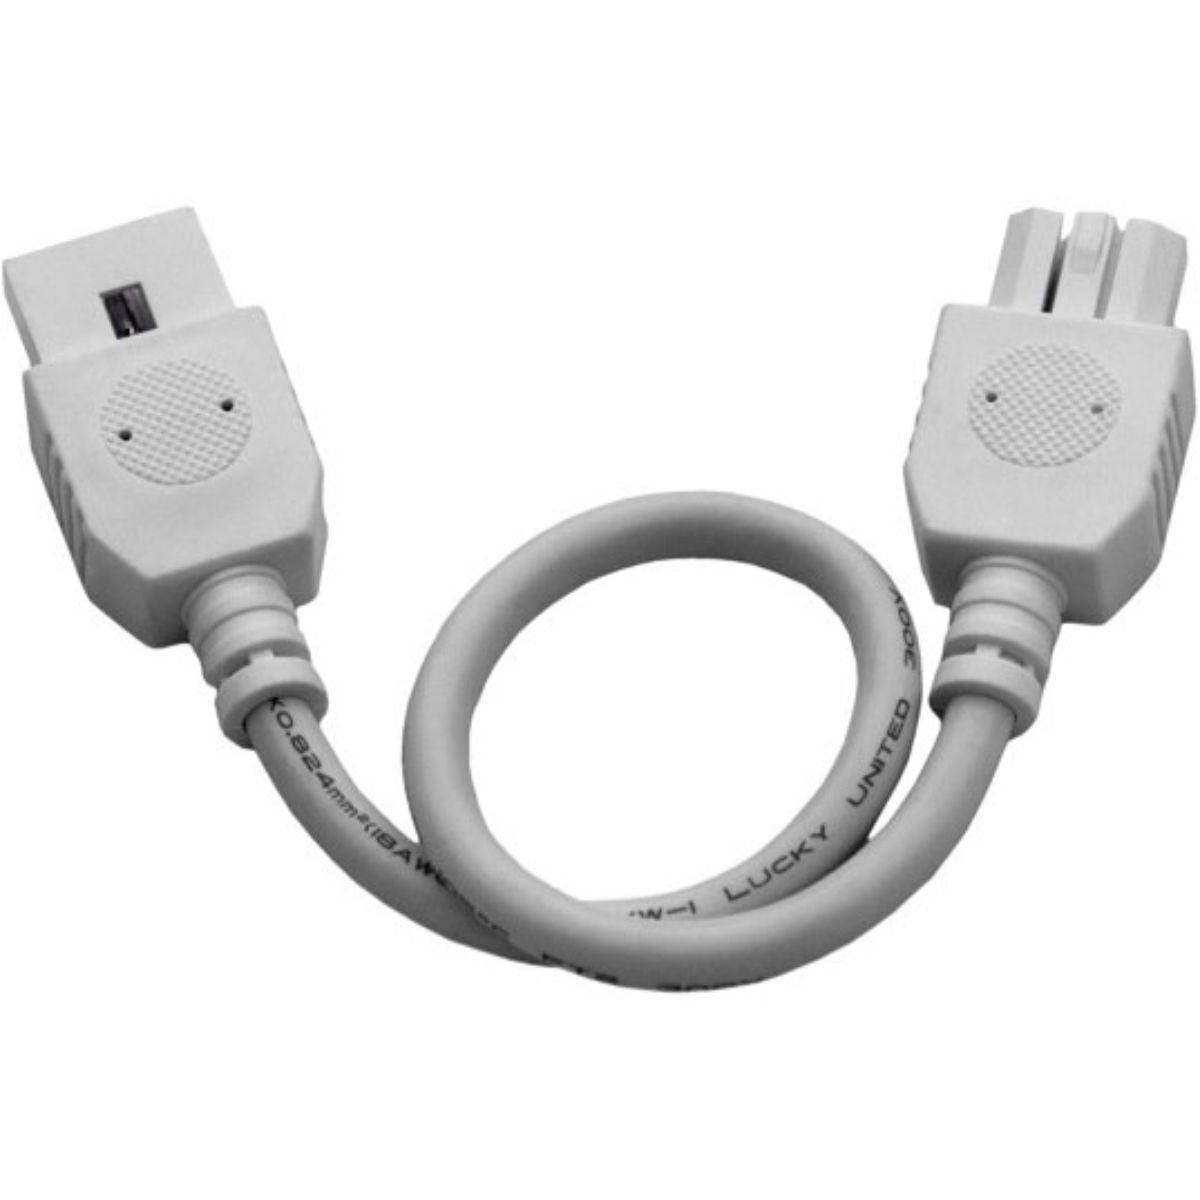 CounterMax 9in. Connecting Cord, White - Bees Lighting